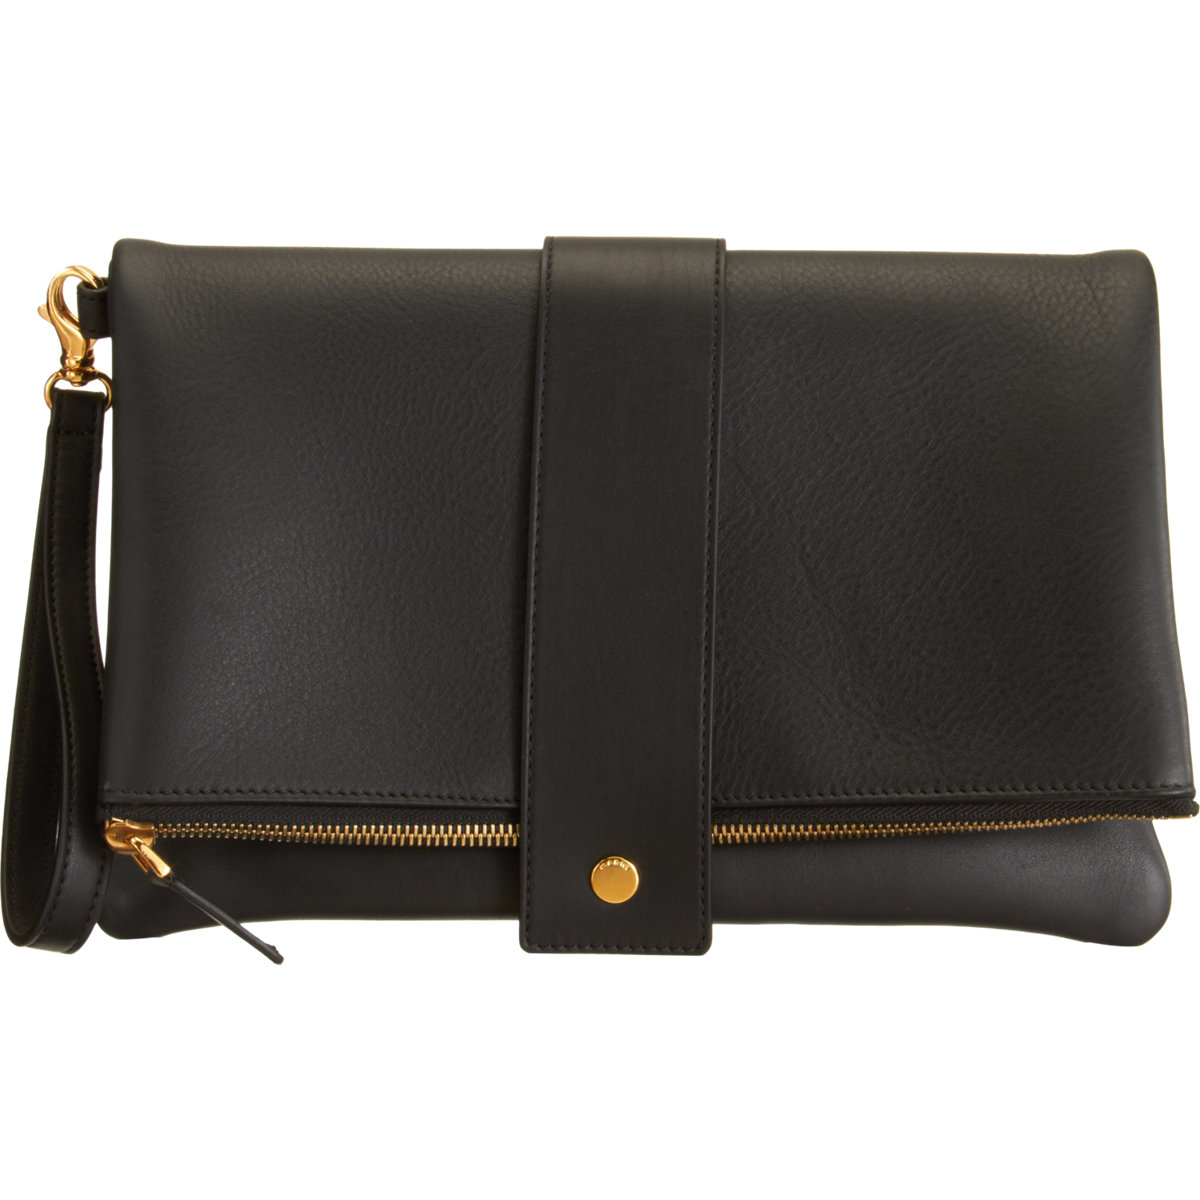 Marni Fold Over Snap Clutch in Black (gold) | Lyst